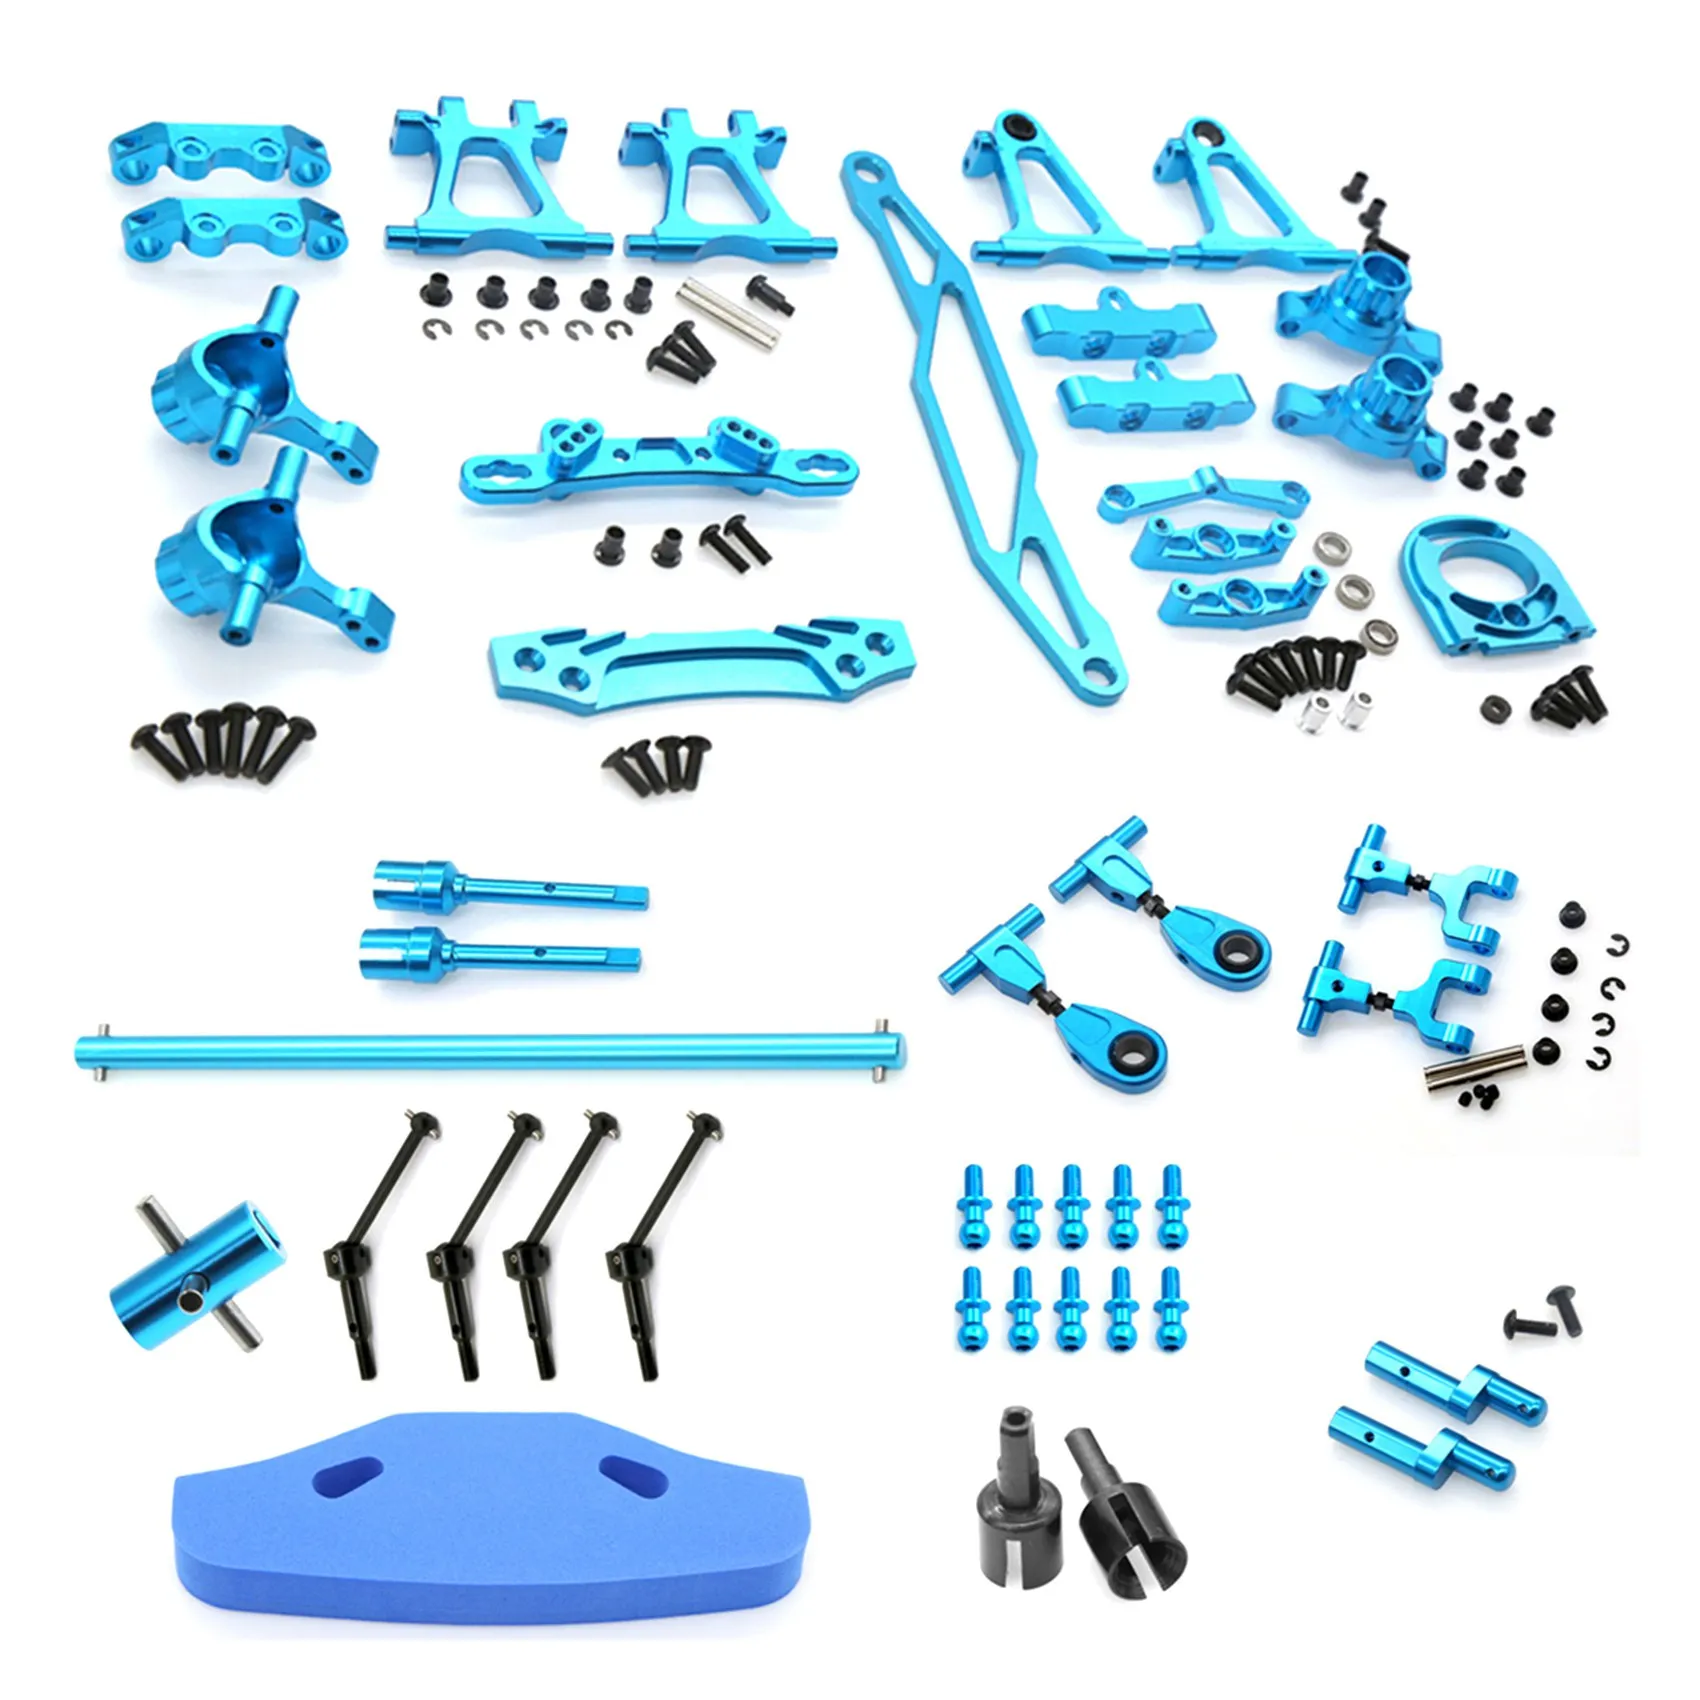 

Metal Modification Accessory Kit Suspension Arms Steering Knuckle Set for Tamiya TT02 TT-02 1/10 RC Car Upgrade Parts,1